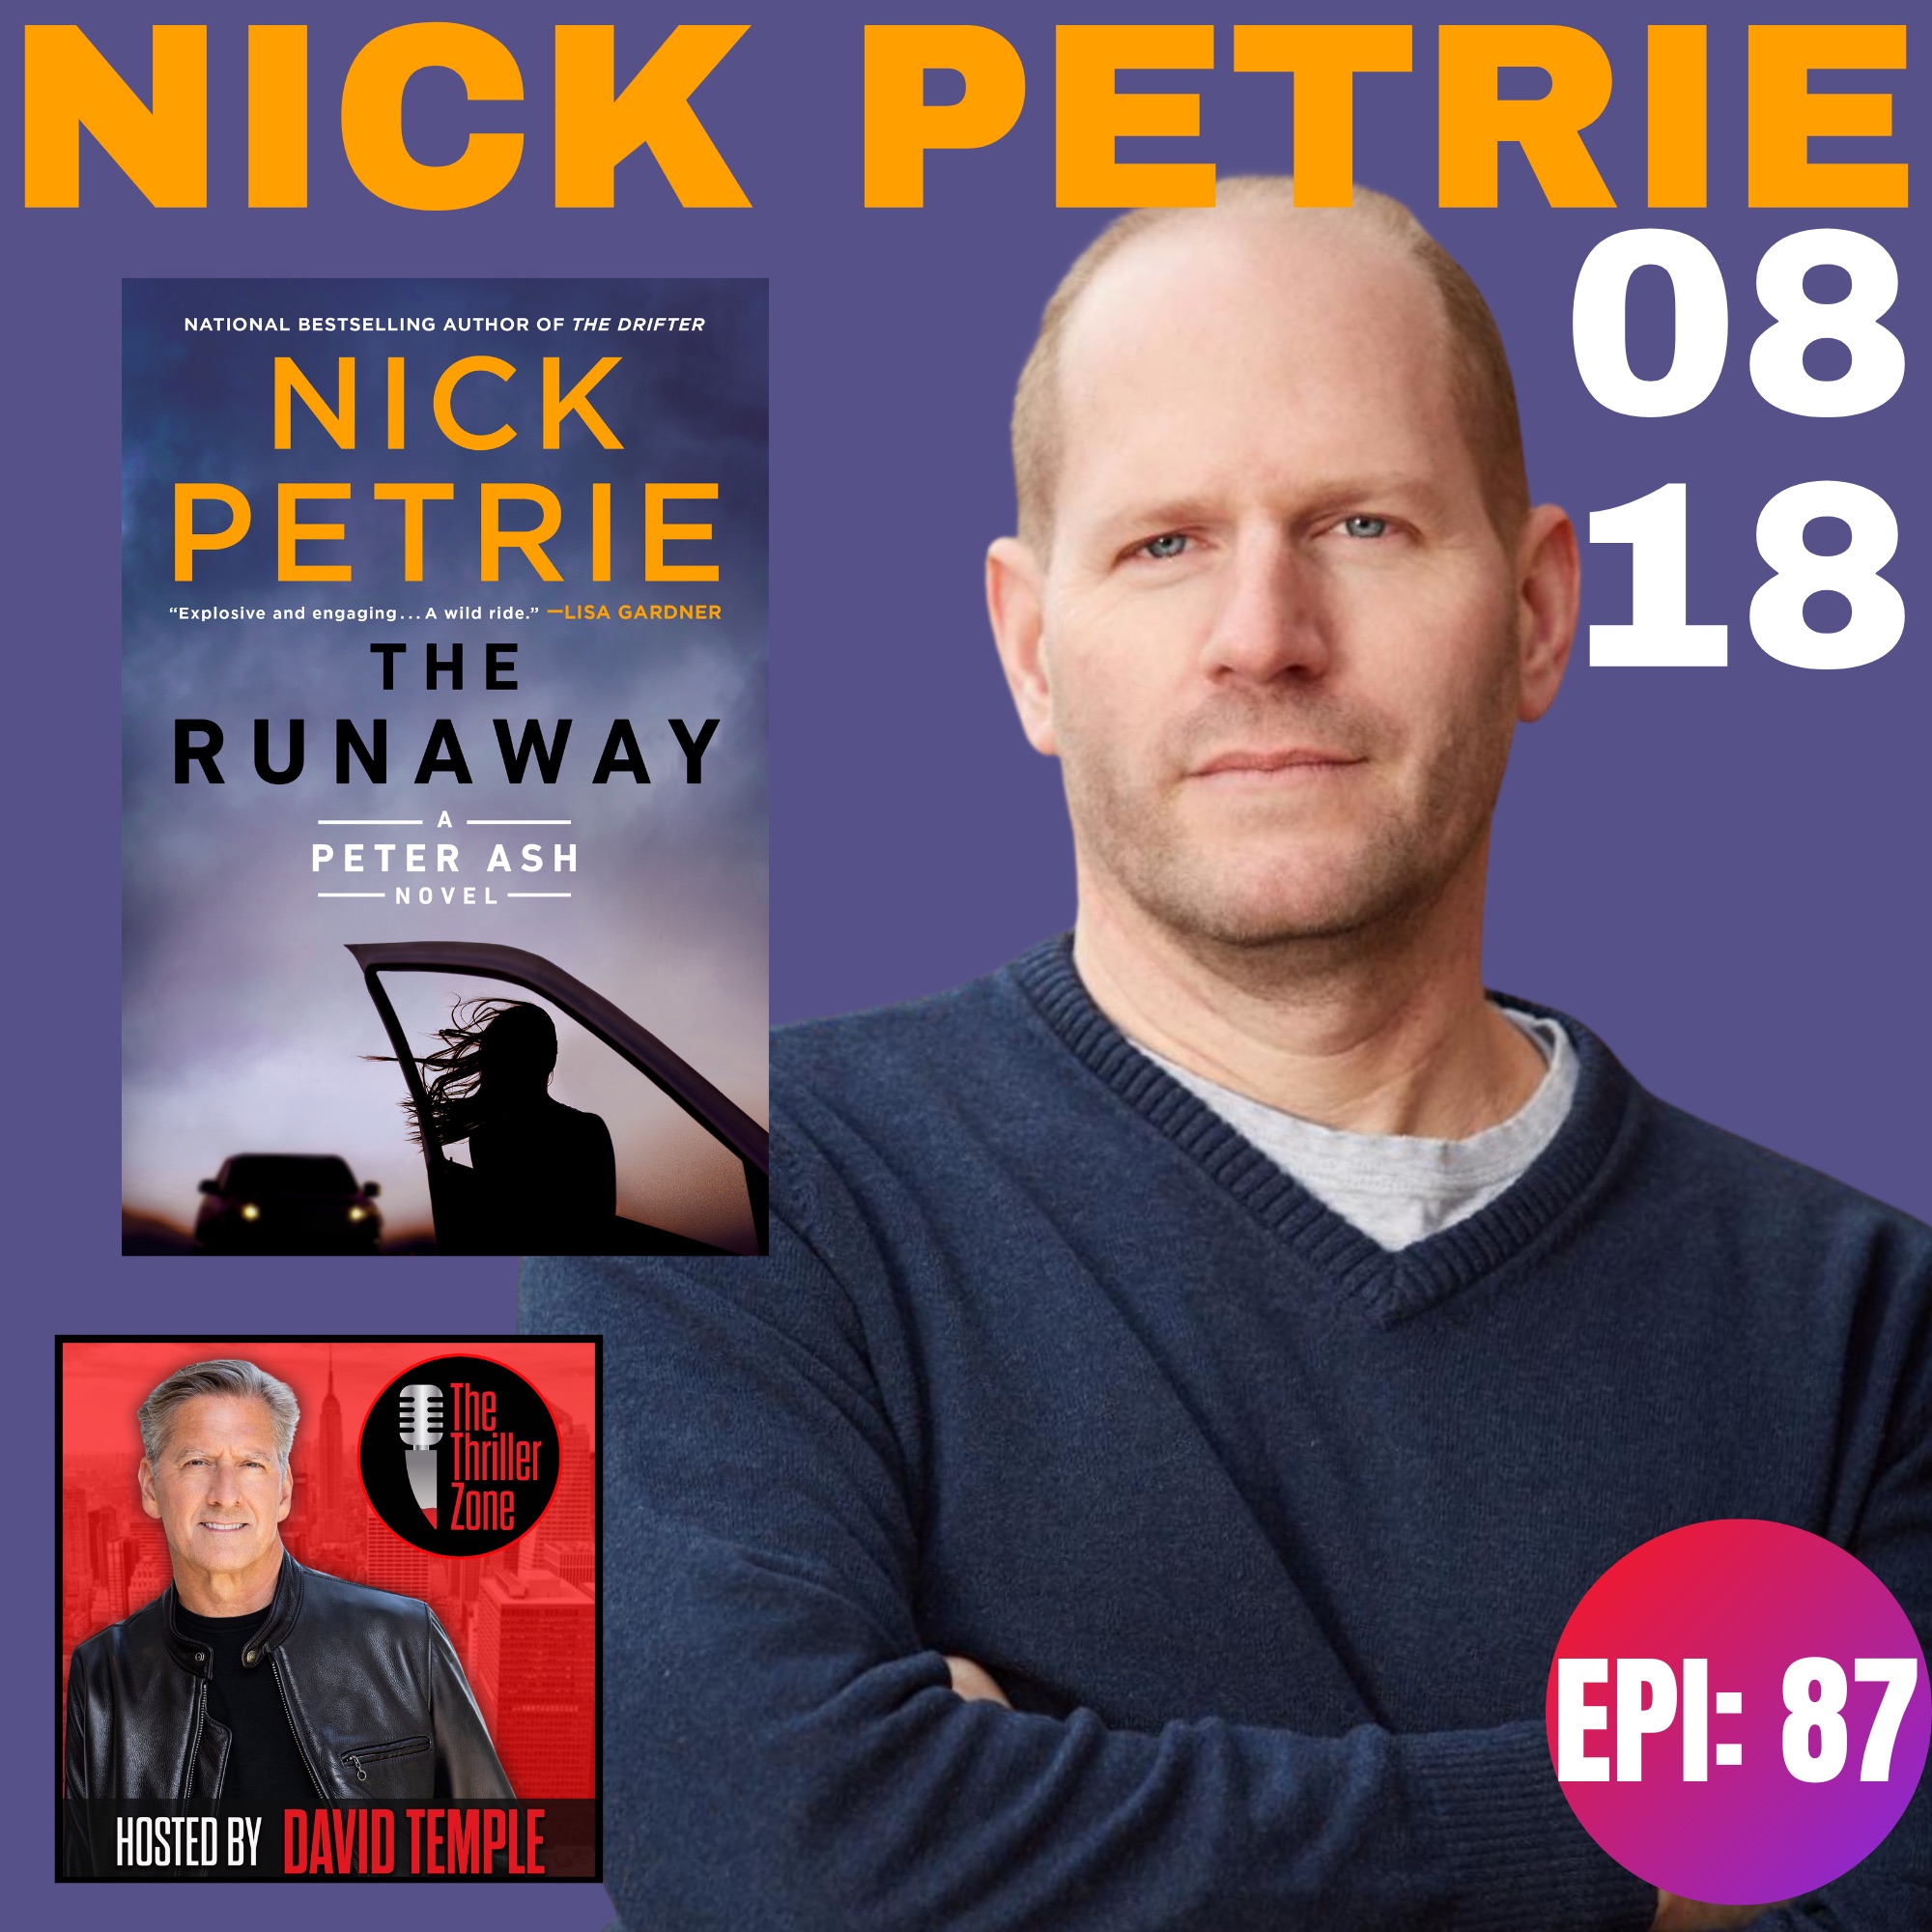 Nick Petrie, author of The Runaway Image